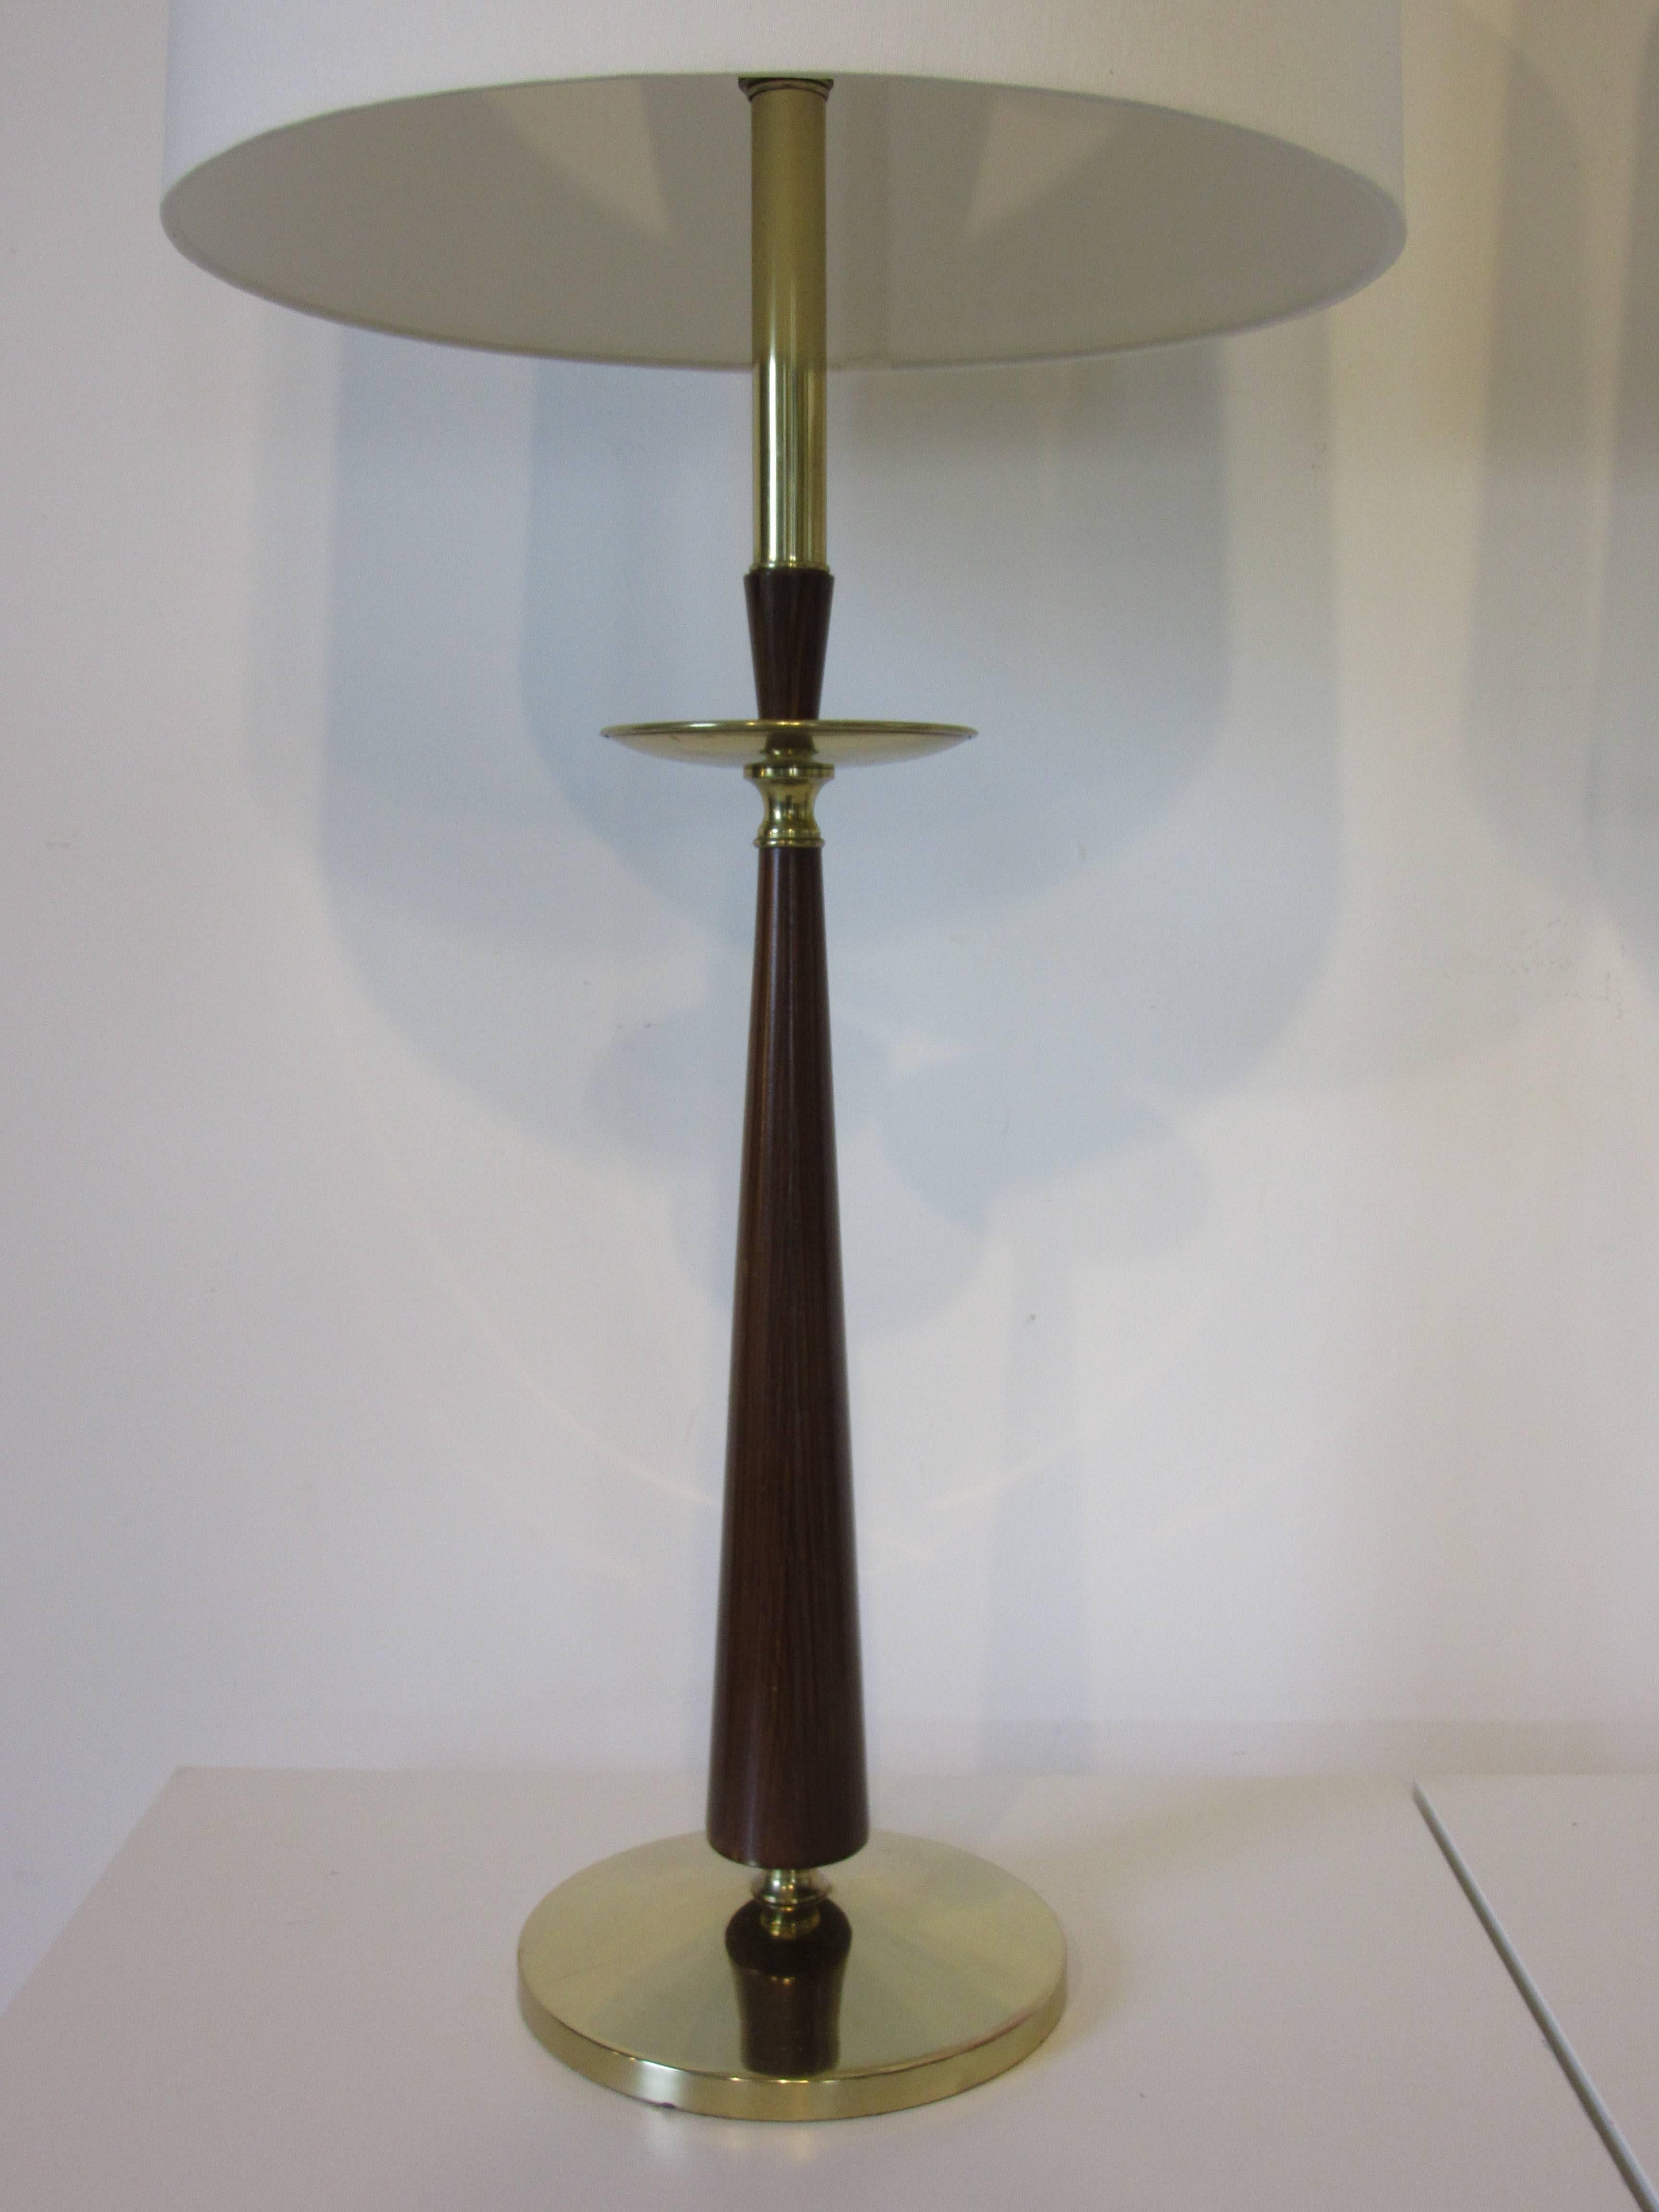 A pair of Mid-Century table lamps with brass bases and details with a faux rosewood body topped by cream colored linen shades in a simple and handsome design. Made by the Stiffel Lamp Company. The lampshade dia. is 15